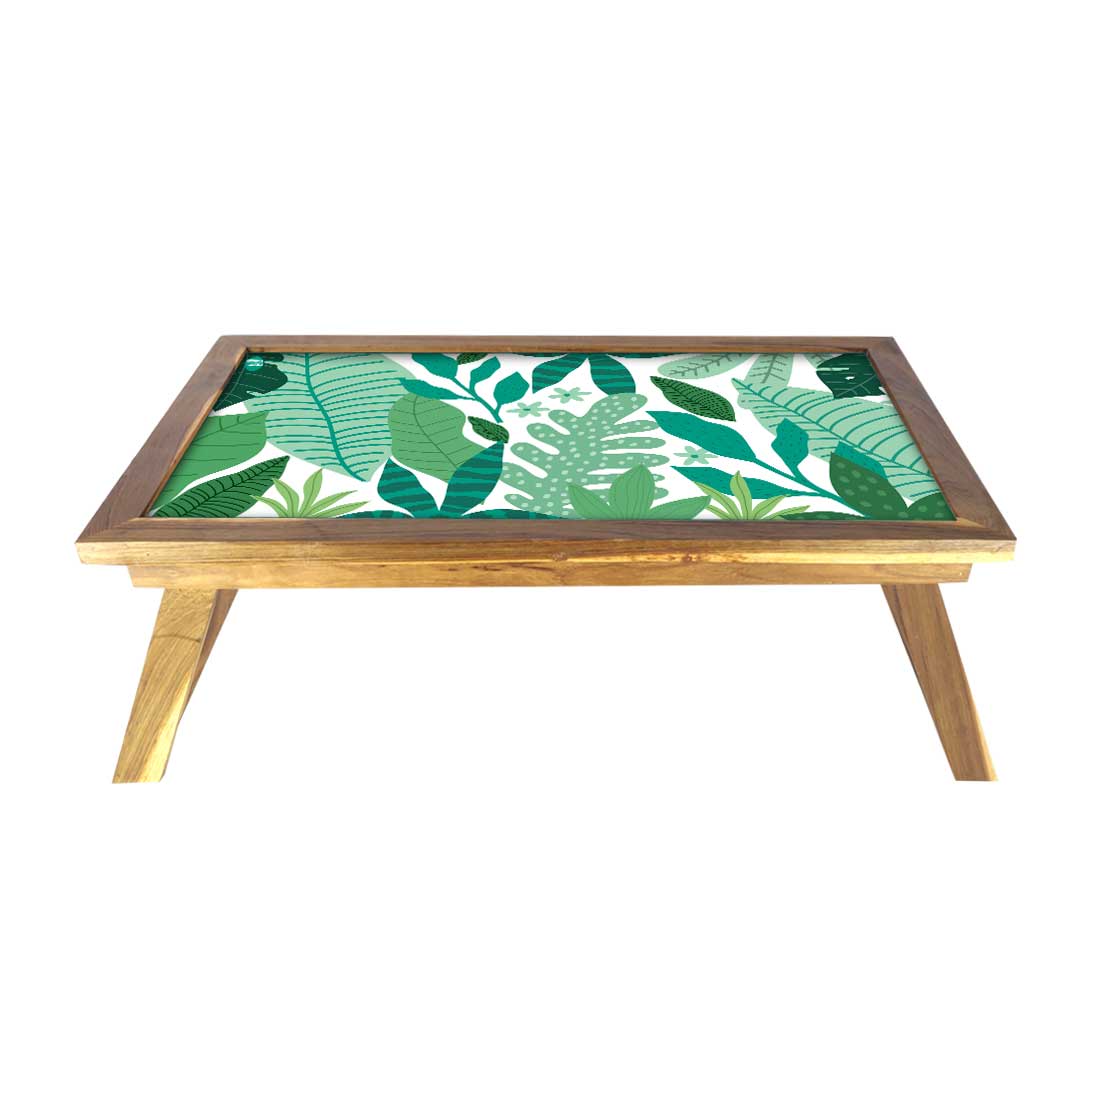 Wooden Folding Laptop Bed Breakfast Table Tray - Tropical Vibes Nutcase